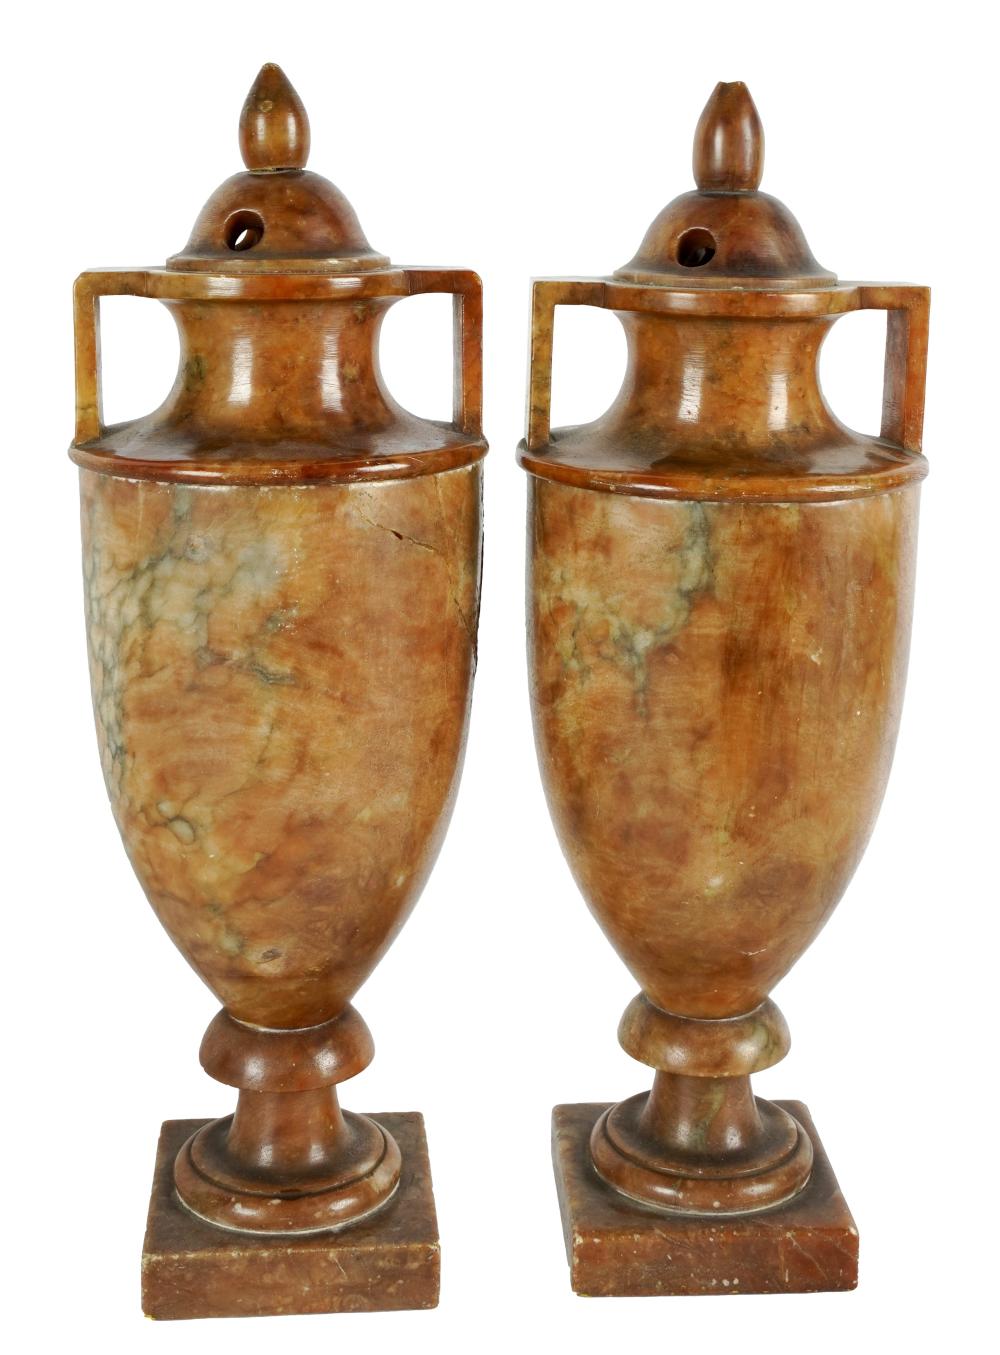 PAIR OF STONE URN-FORM TABLE LAMPSeach